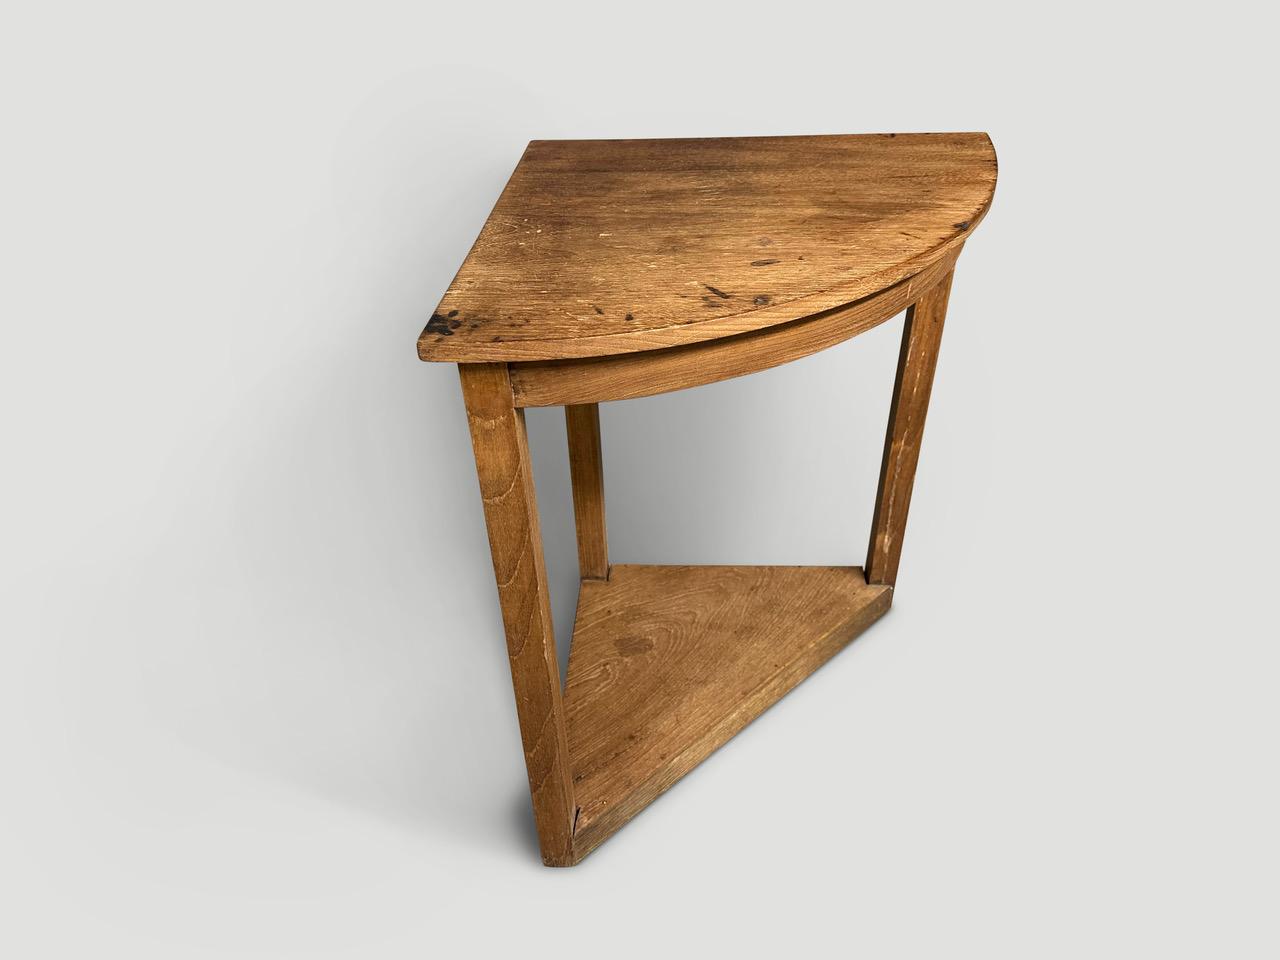 Teak wood Wabi Sabi antique corner table. Celebrating all the marks that time and loving use have left behind. Circa 1950. Full dimensions; Each straight side is 19.5” x curved side 27.5” wide. 

This side table was hand made in the spirit of